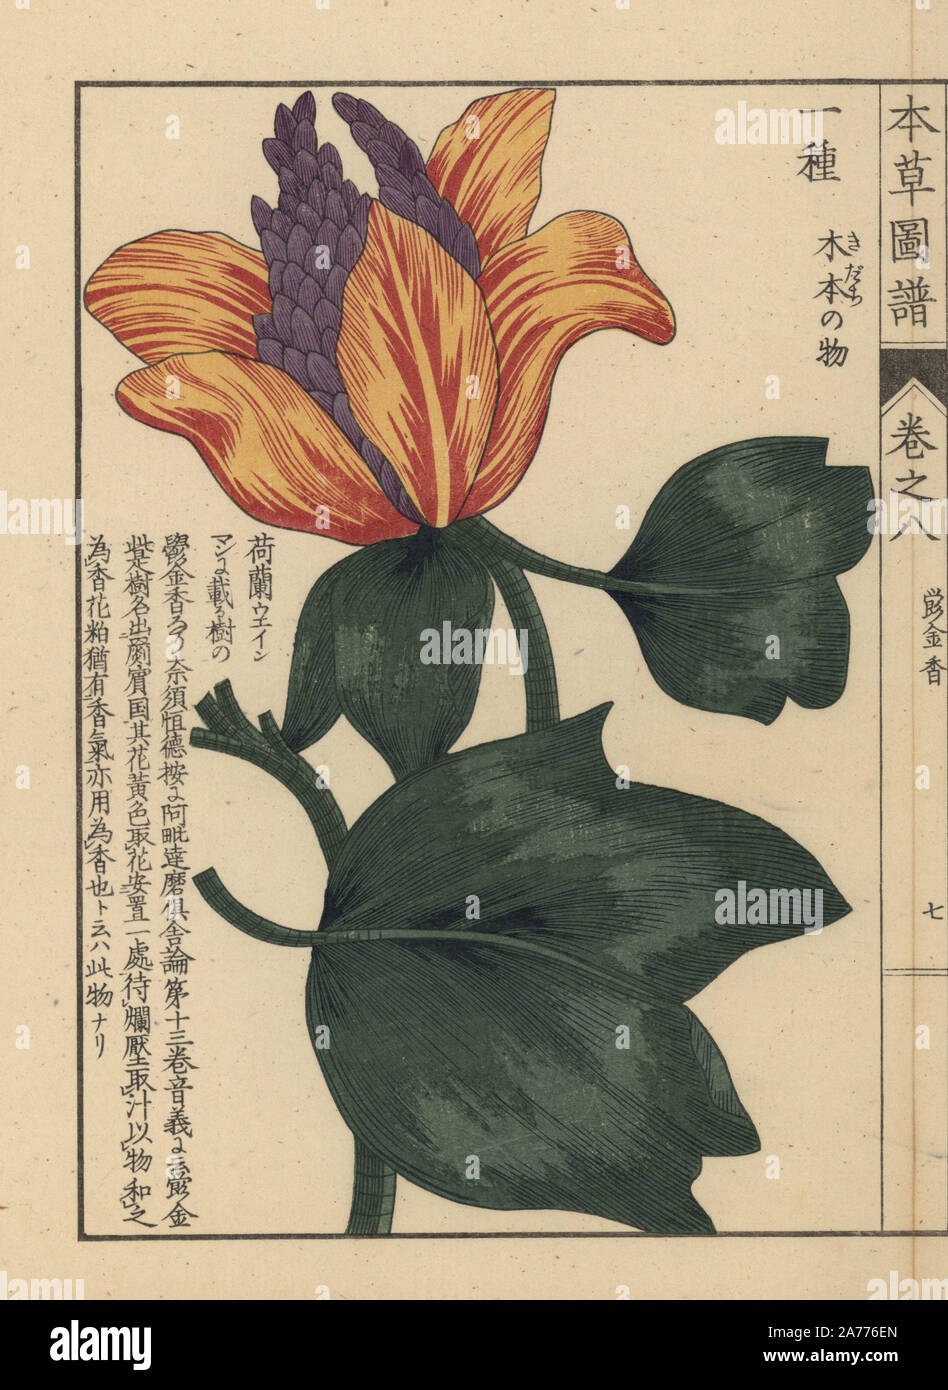 American tulip tree, Liriodendron tulipifera L. Colour-printed woodblock engraving by Kan'en Iwasaki from 'Honzo Zufu,' an Illustrated Guide to Medicinal Plants, Japan, 1884. Iwasaki (1786-1842) was a Japanese botanist, entomologist and zoologist. He was one of the first Japanese botanists to incorporate western knowledge into his studies. Stock Photo